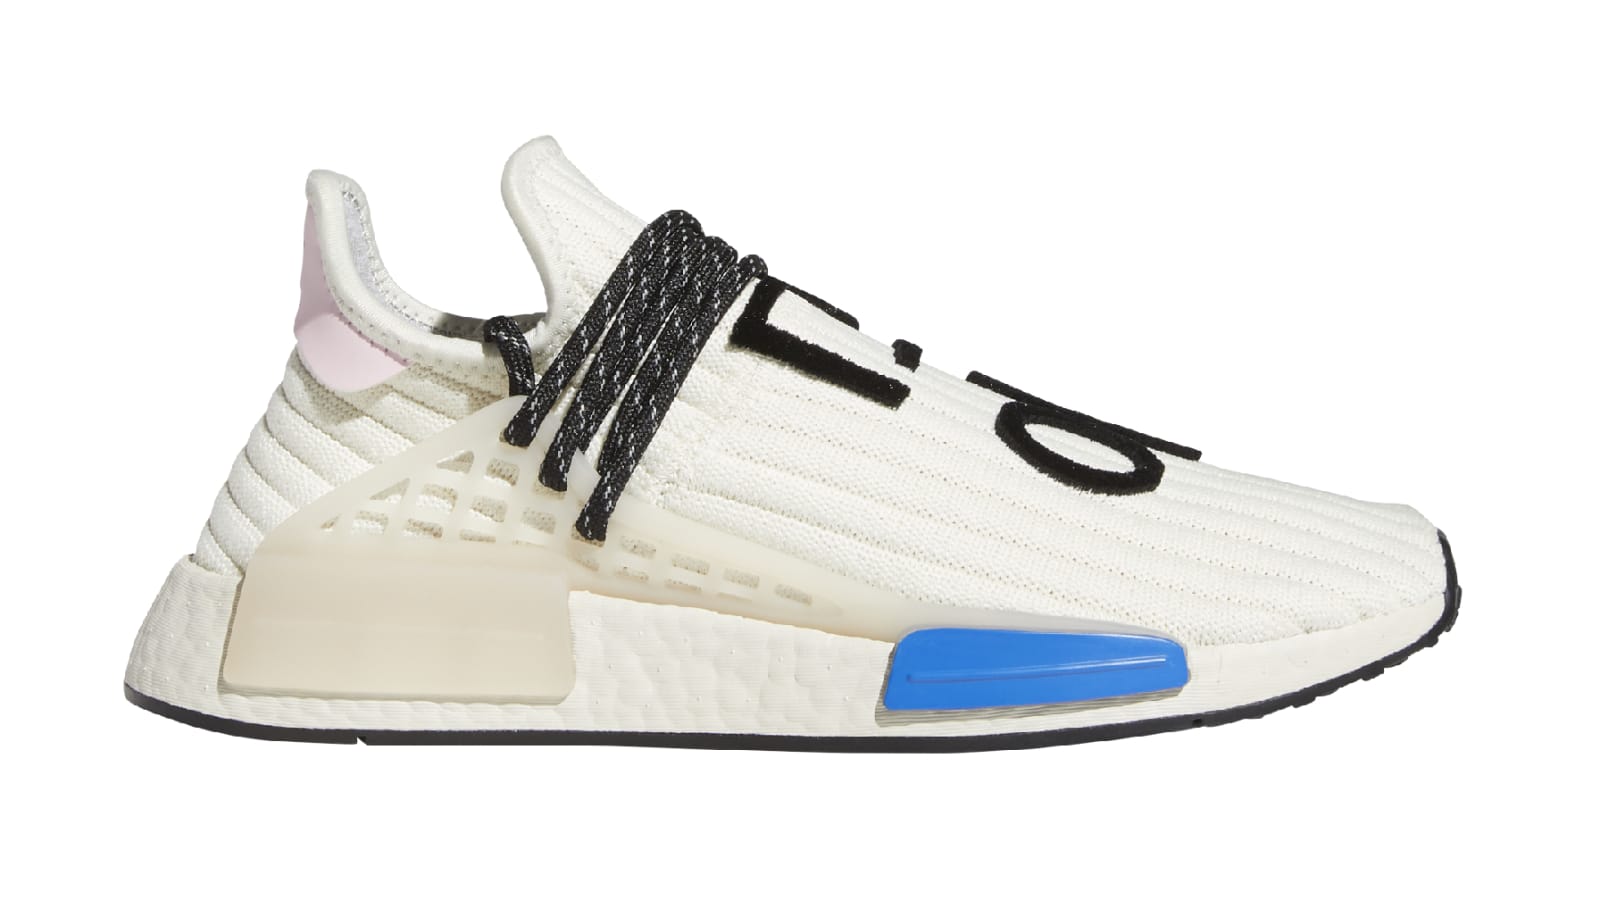 Pharrell x Adidas NMD Hu To In Extremely Limited